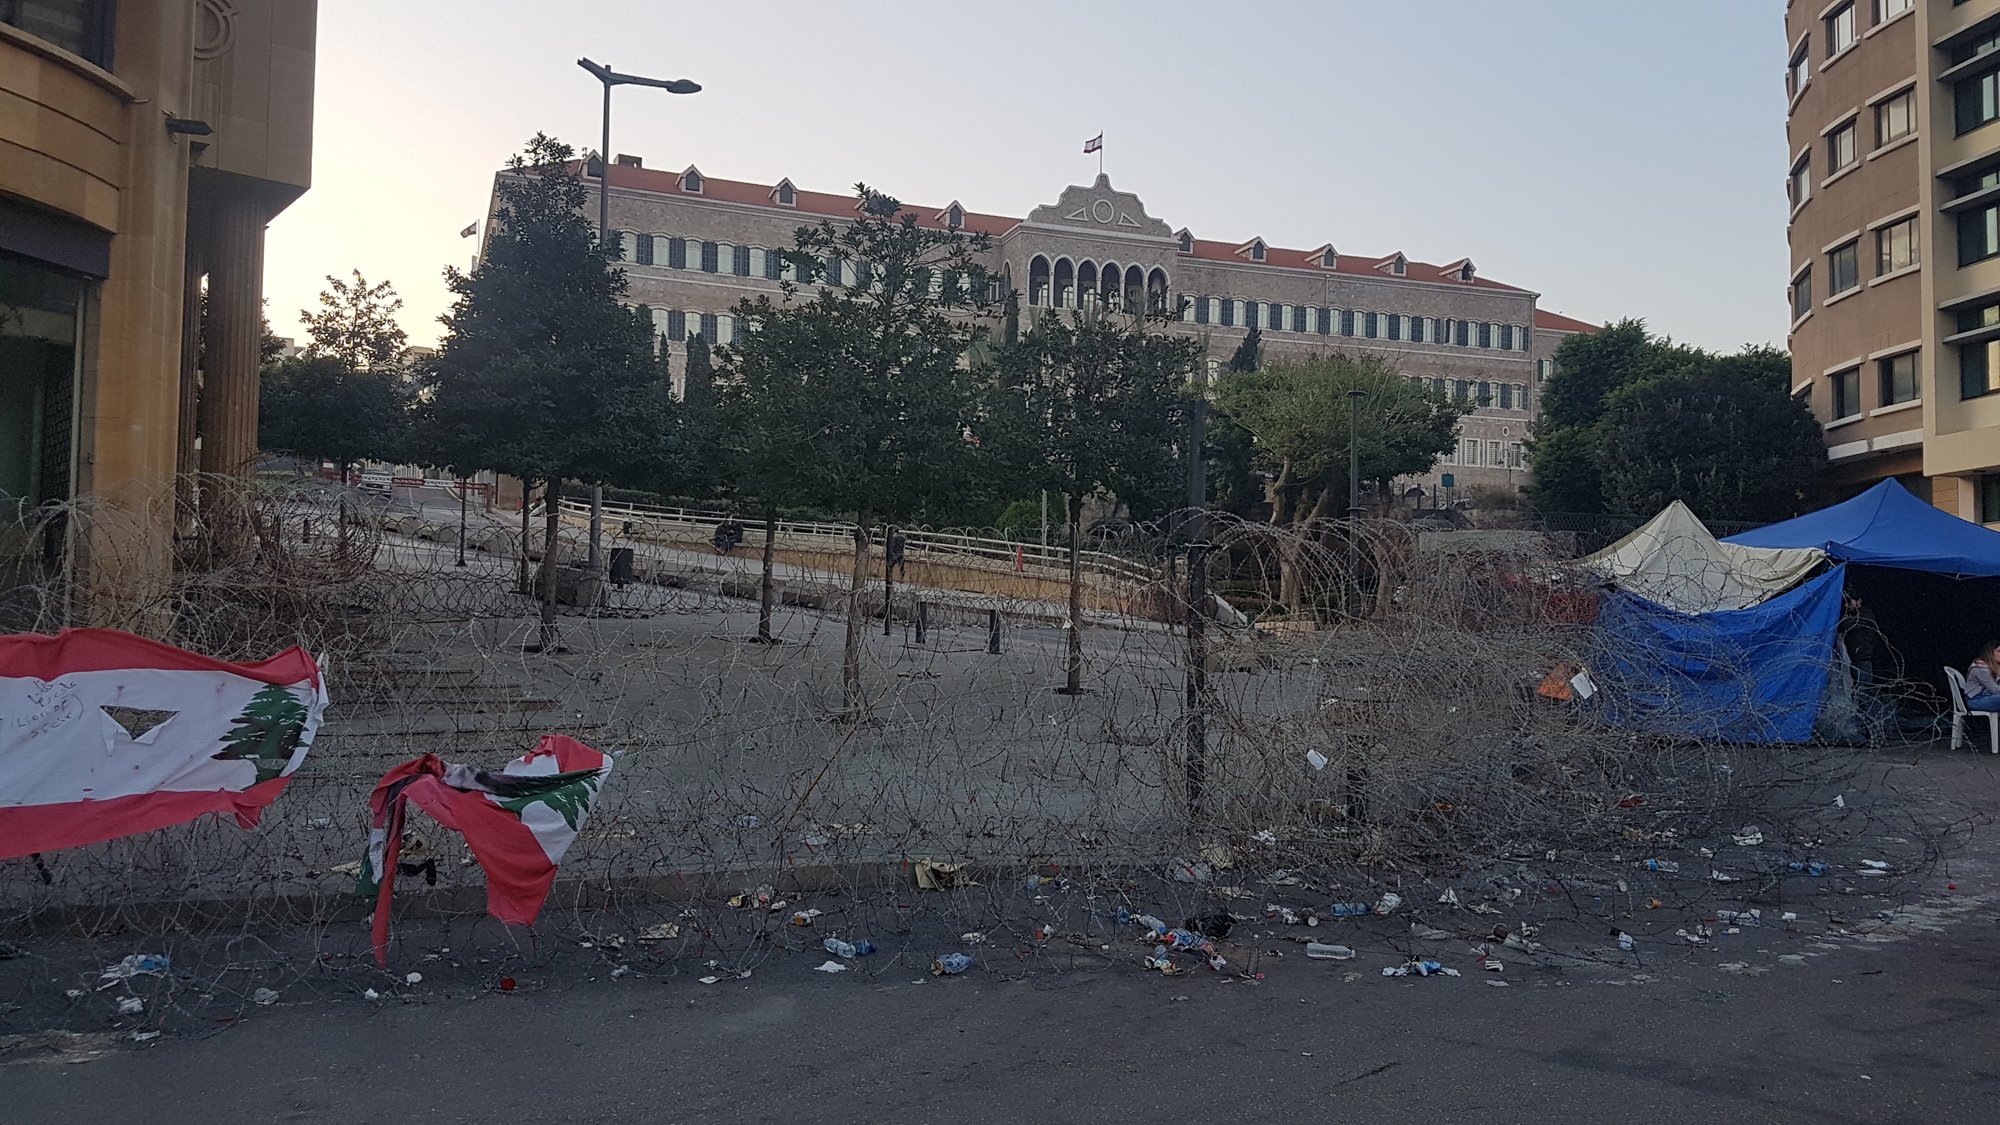 The Government Serail in the background is separated from Riad al-Solh square by barbed wires. November 2019. Source: Author